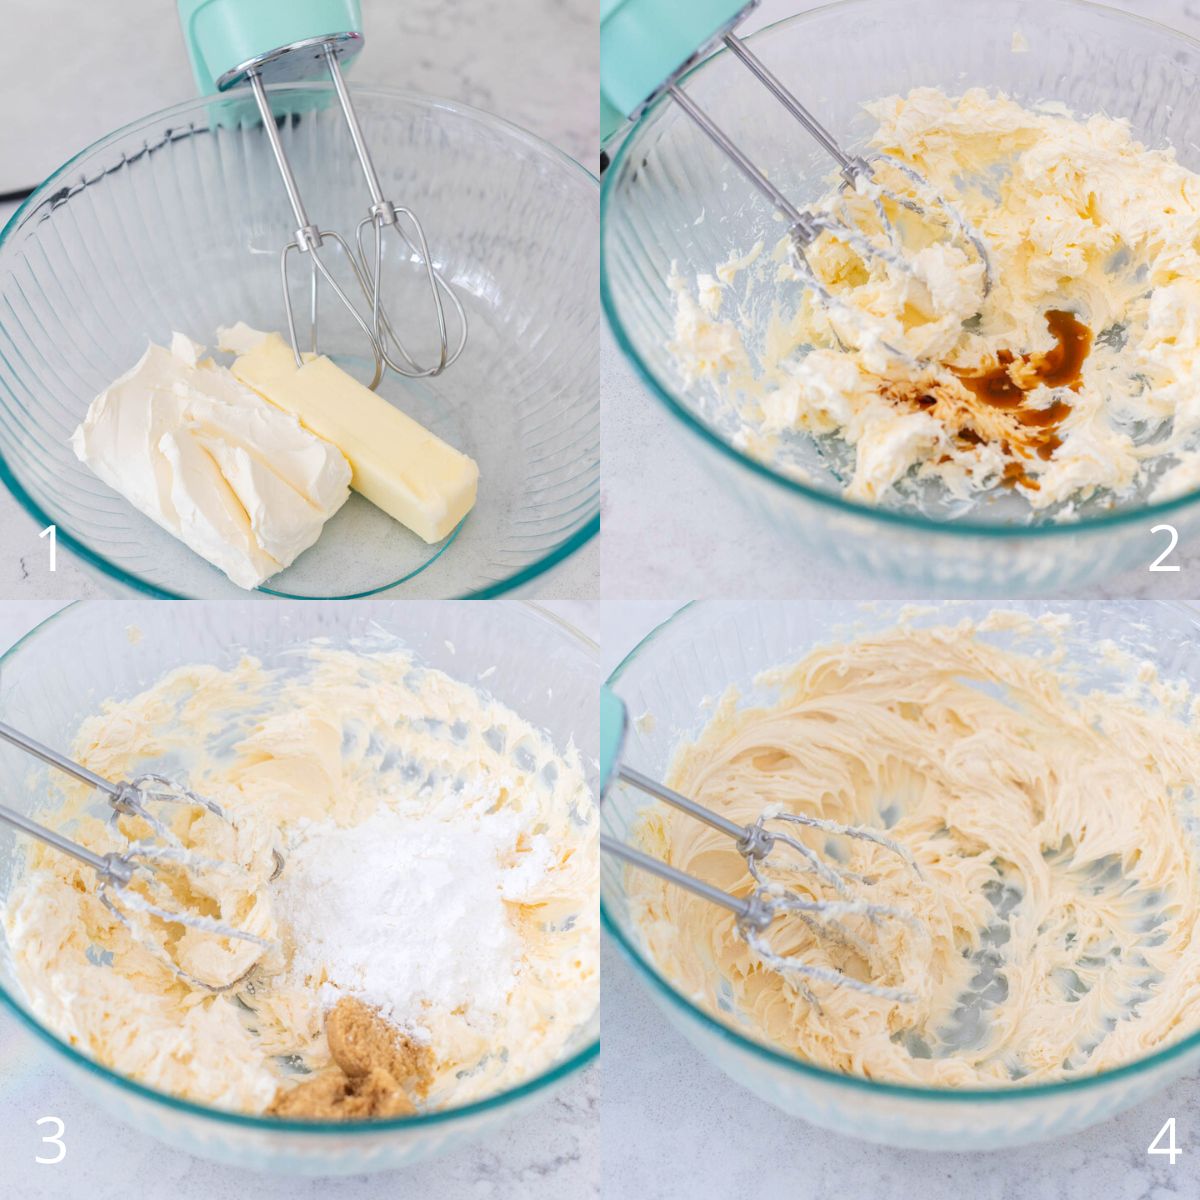 The step by step photos show how to beat the cream cheese and butter and add vanilla and sugar.